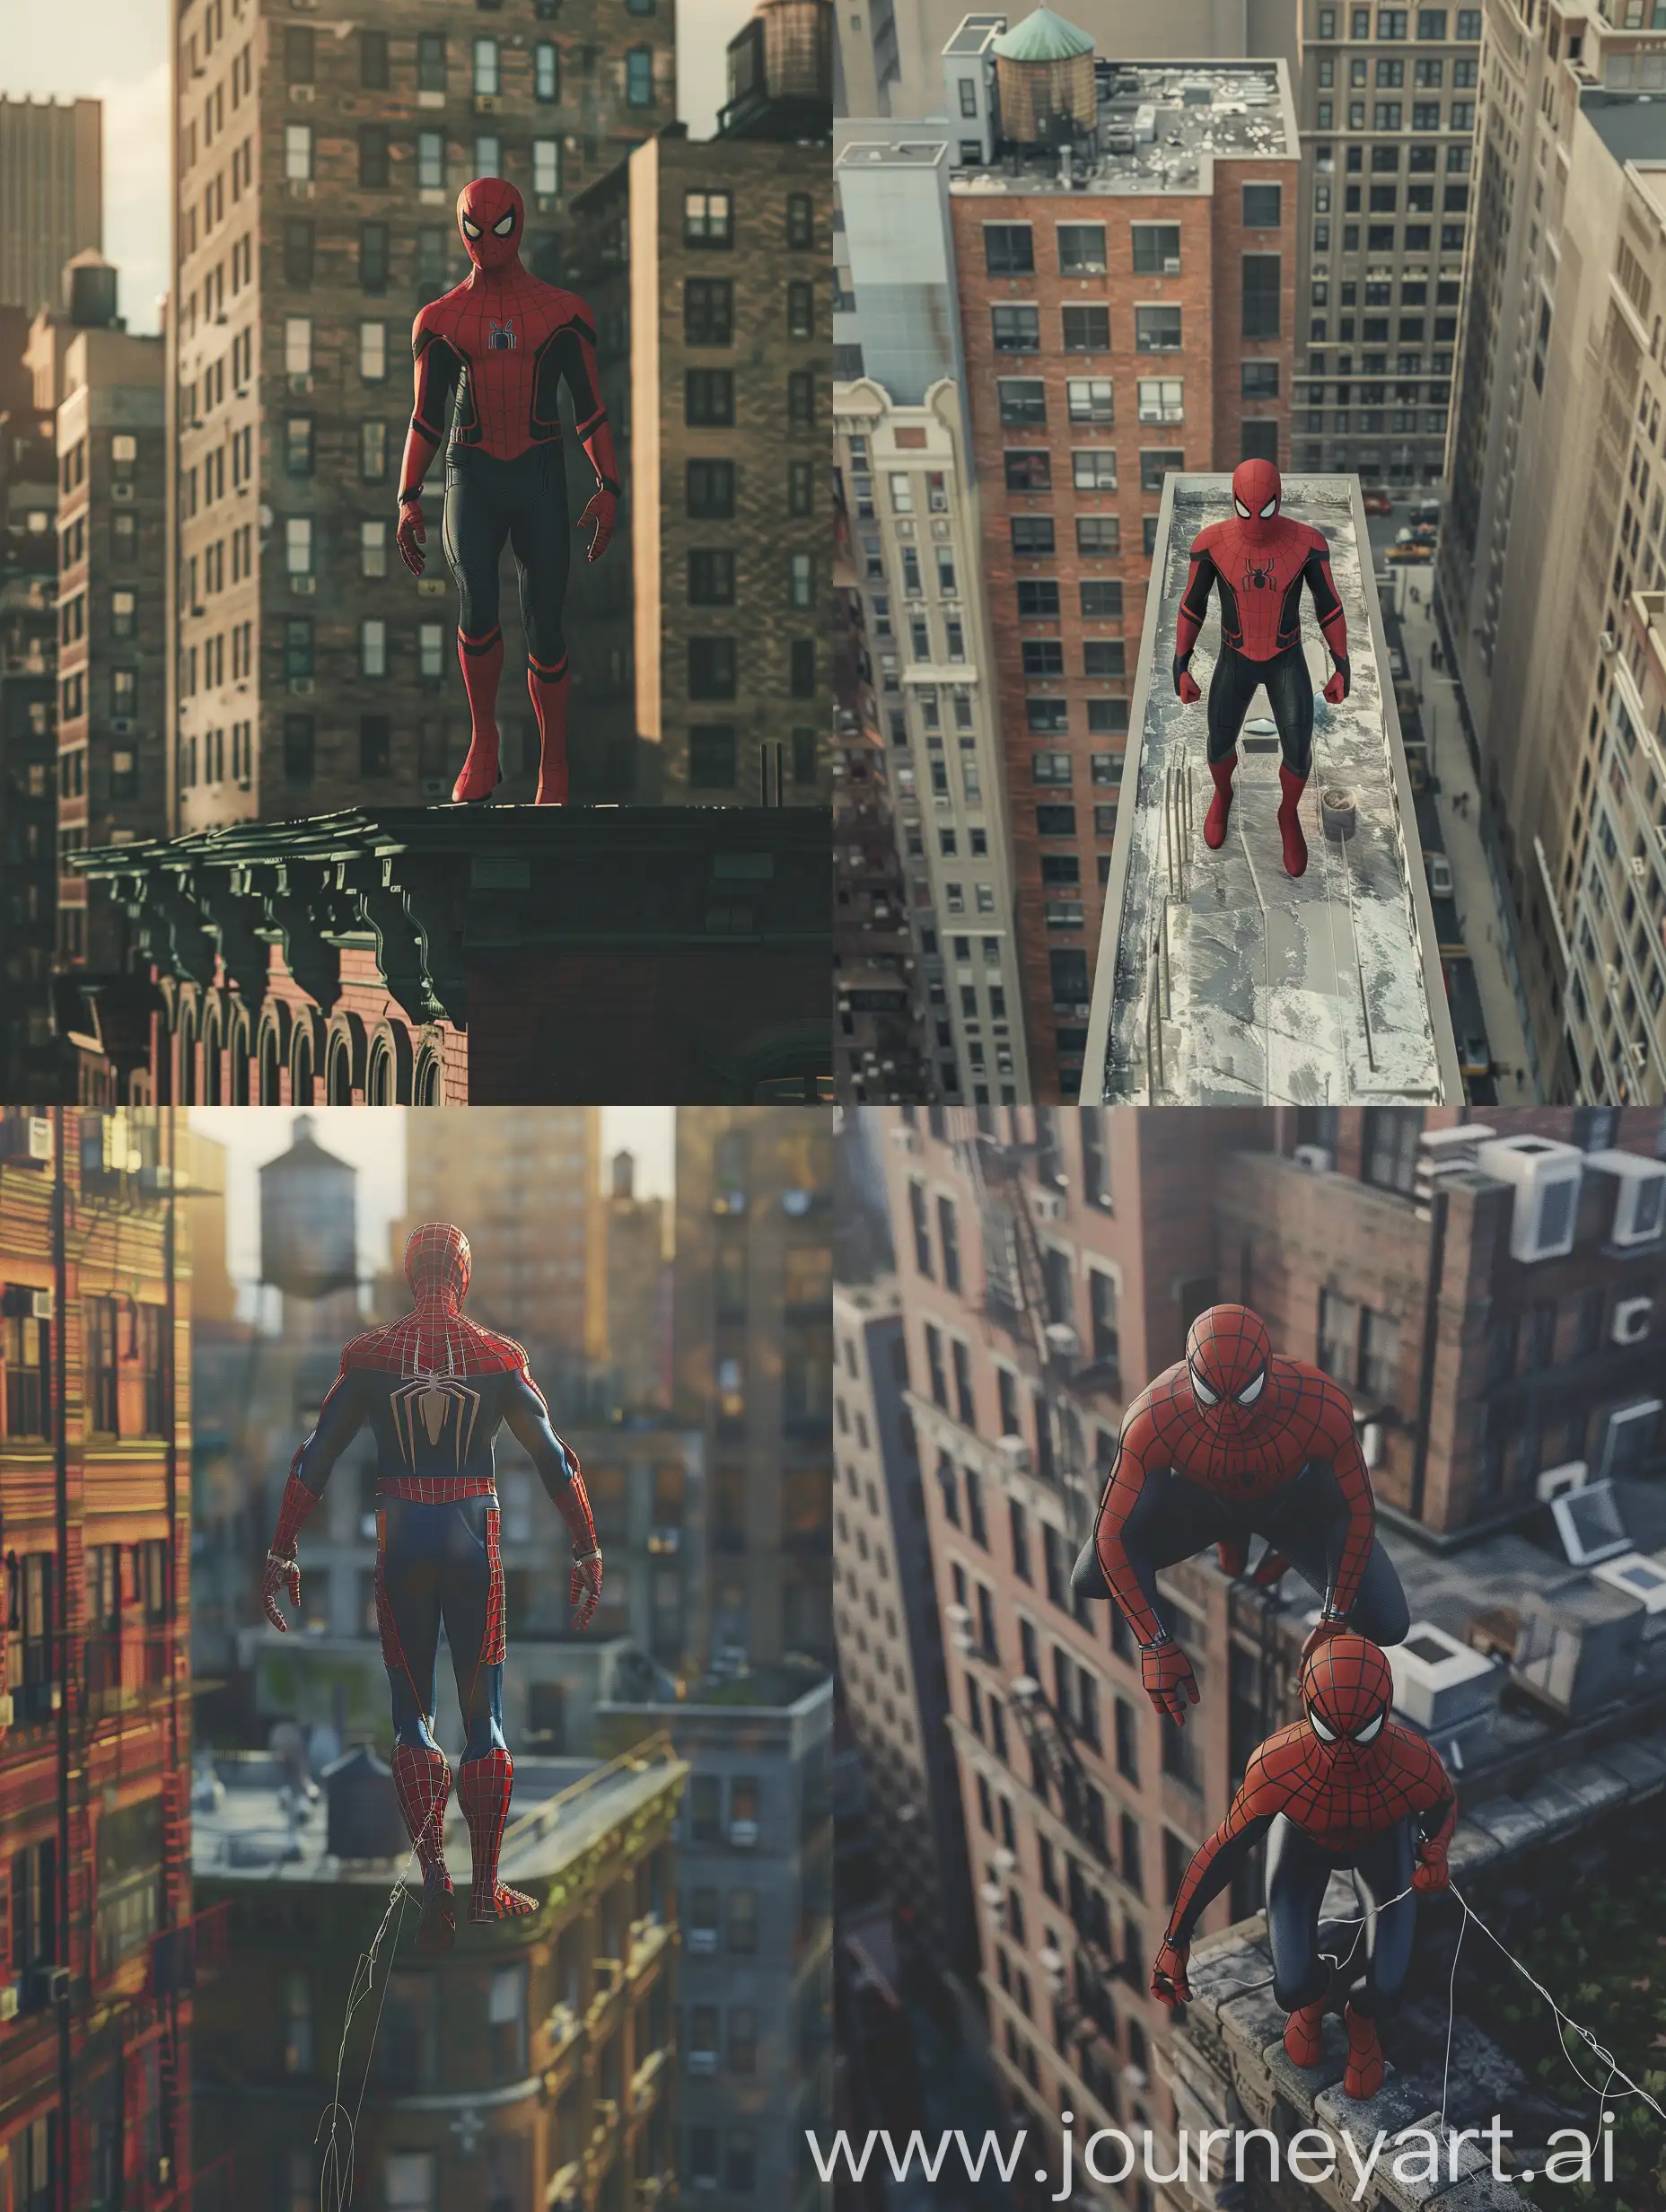 SpiderMan-Walking-Across-New-York-City-Apartment-Building-Ultra-Realistic-8K-Poster